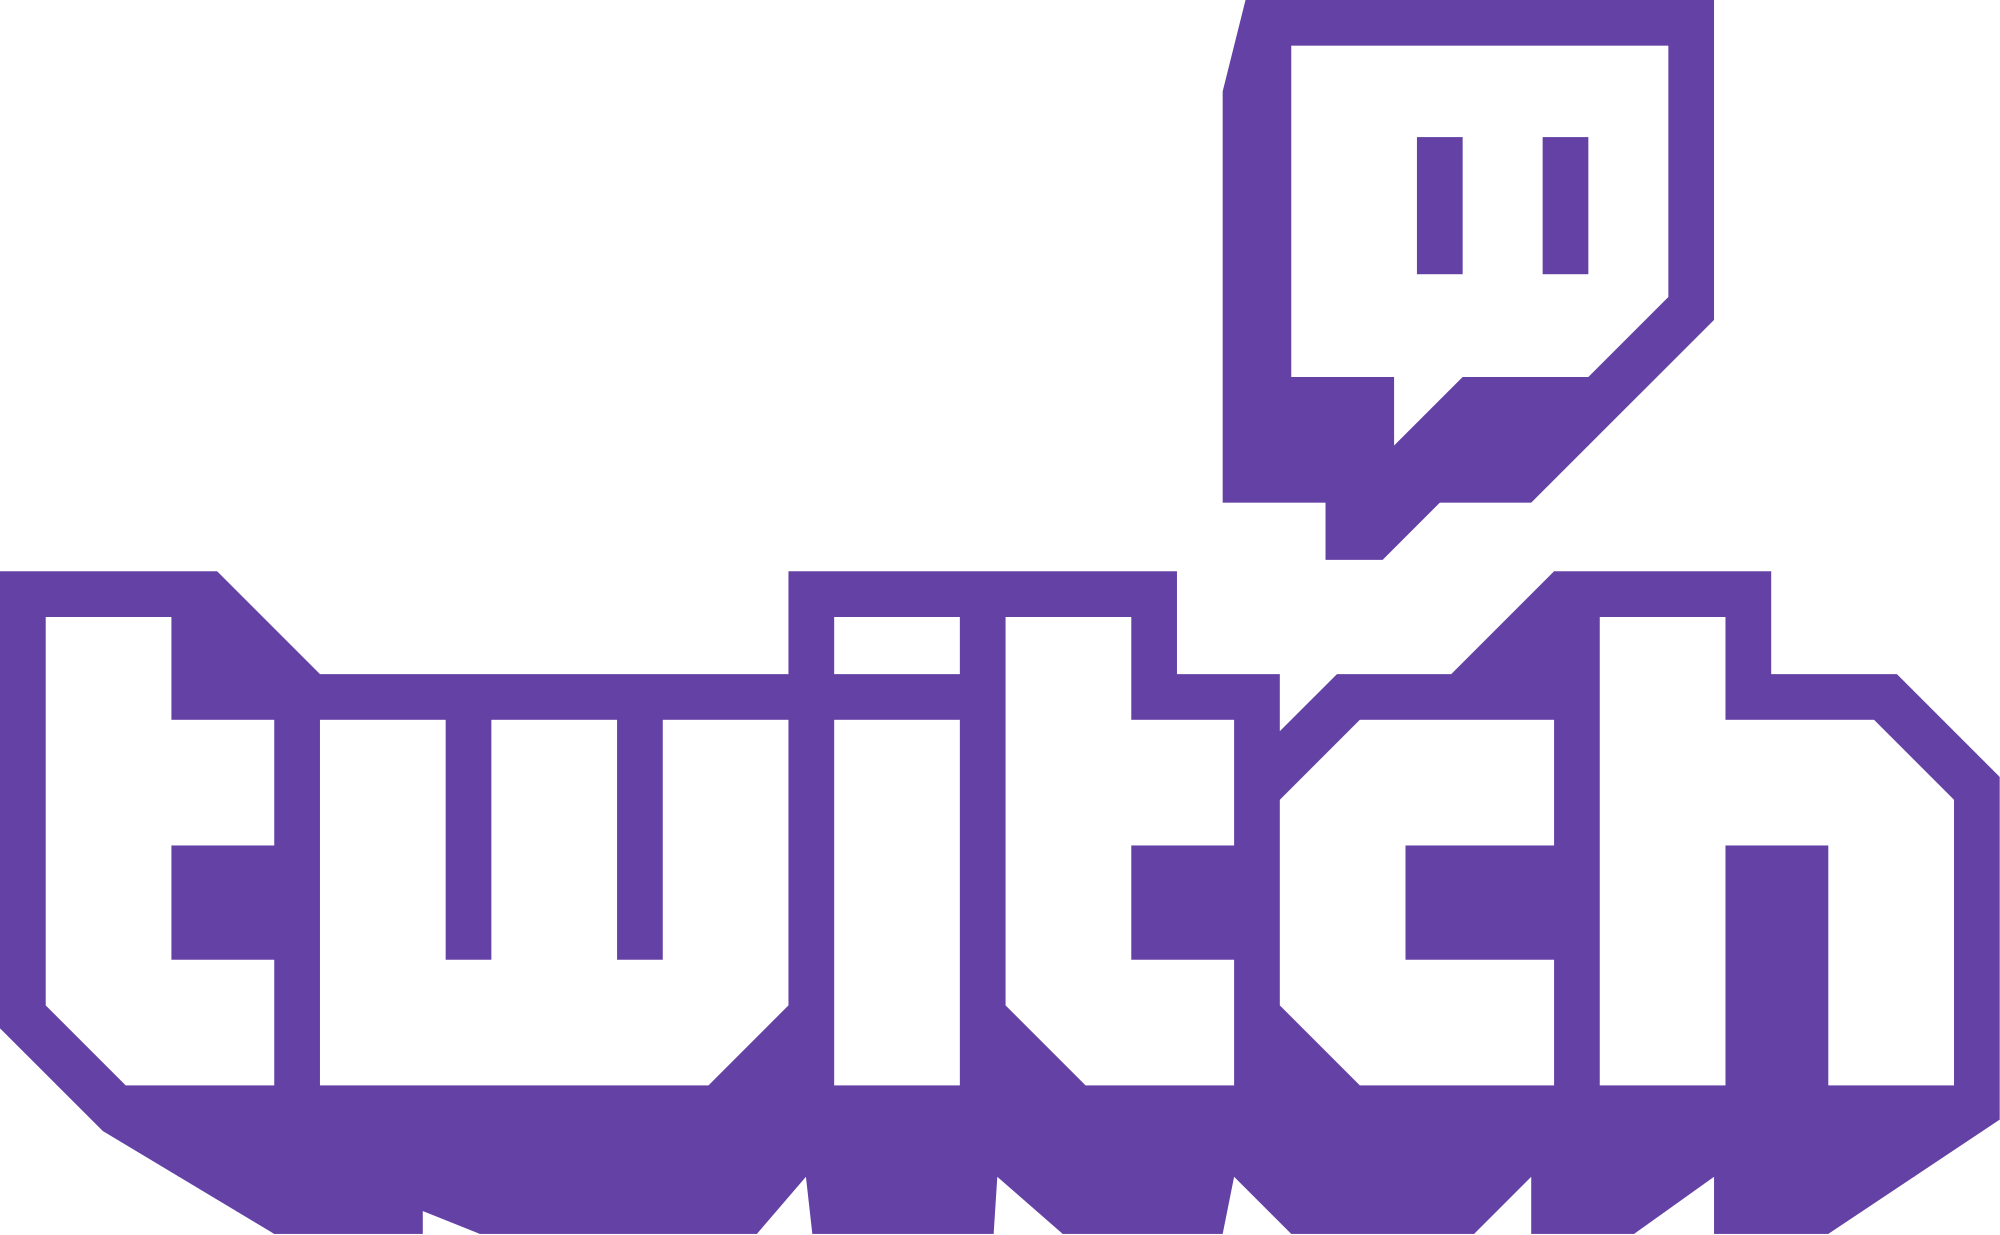 twitch icon. Download PNG